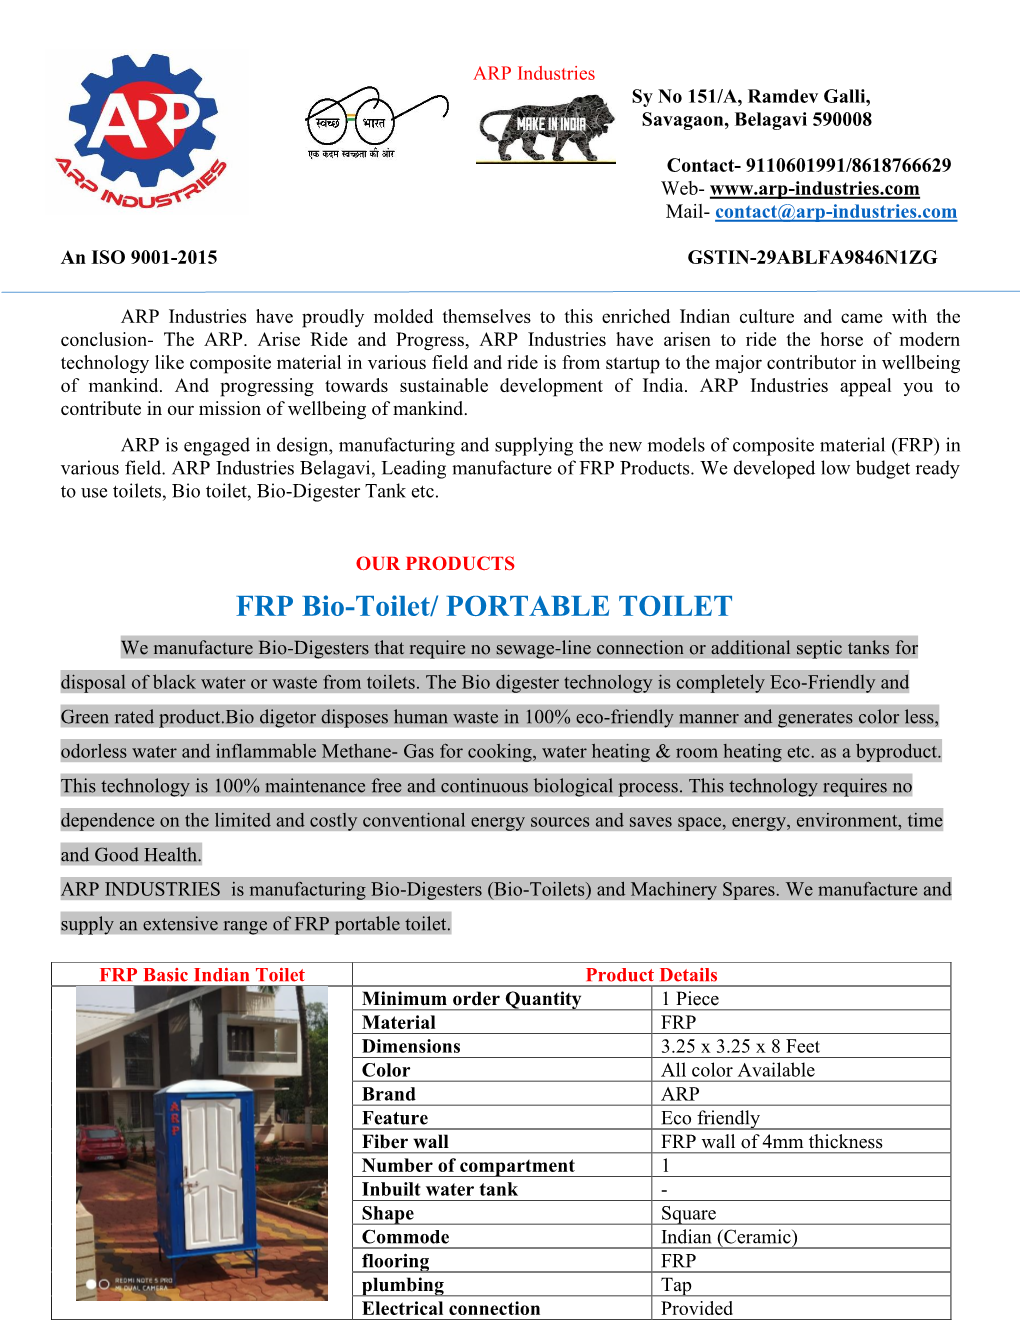 PORTABLE TOILET We Manufacture Bio-Digesters That Require No Sewage-Line Connection Or Additional Septic Tanks for Disposal of Black Water Or Waste from Toilets